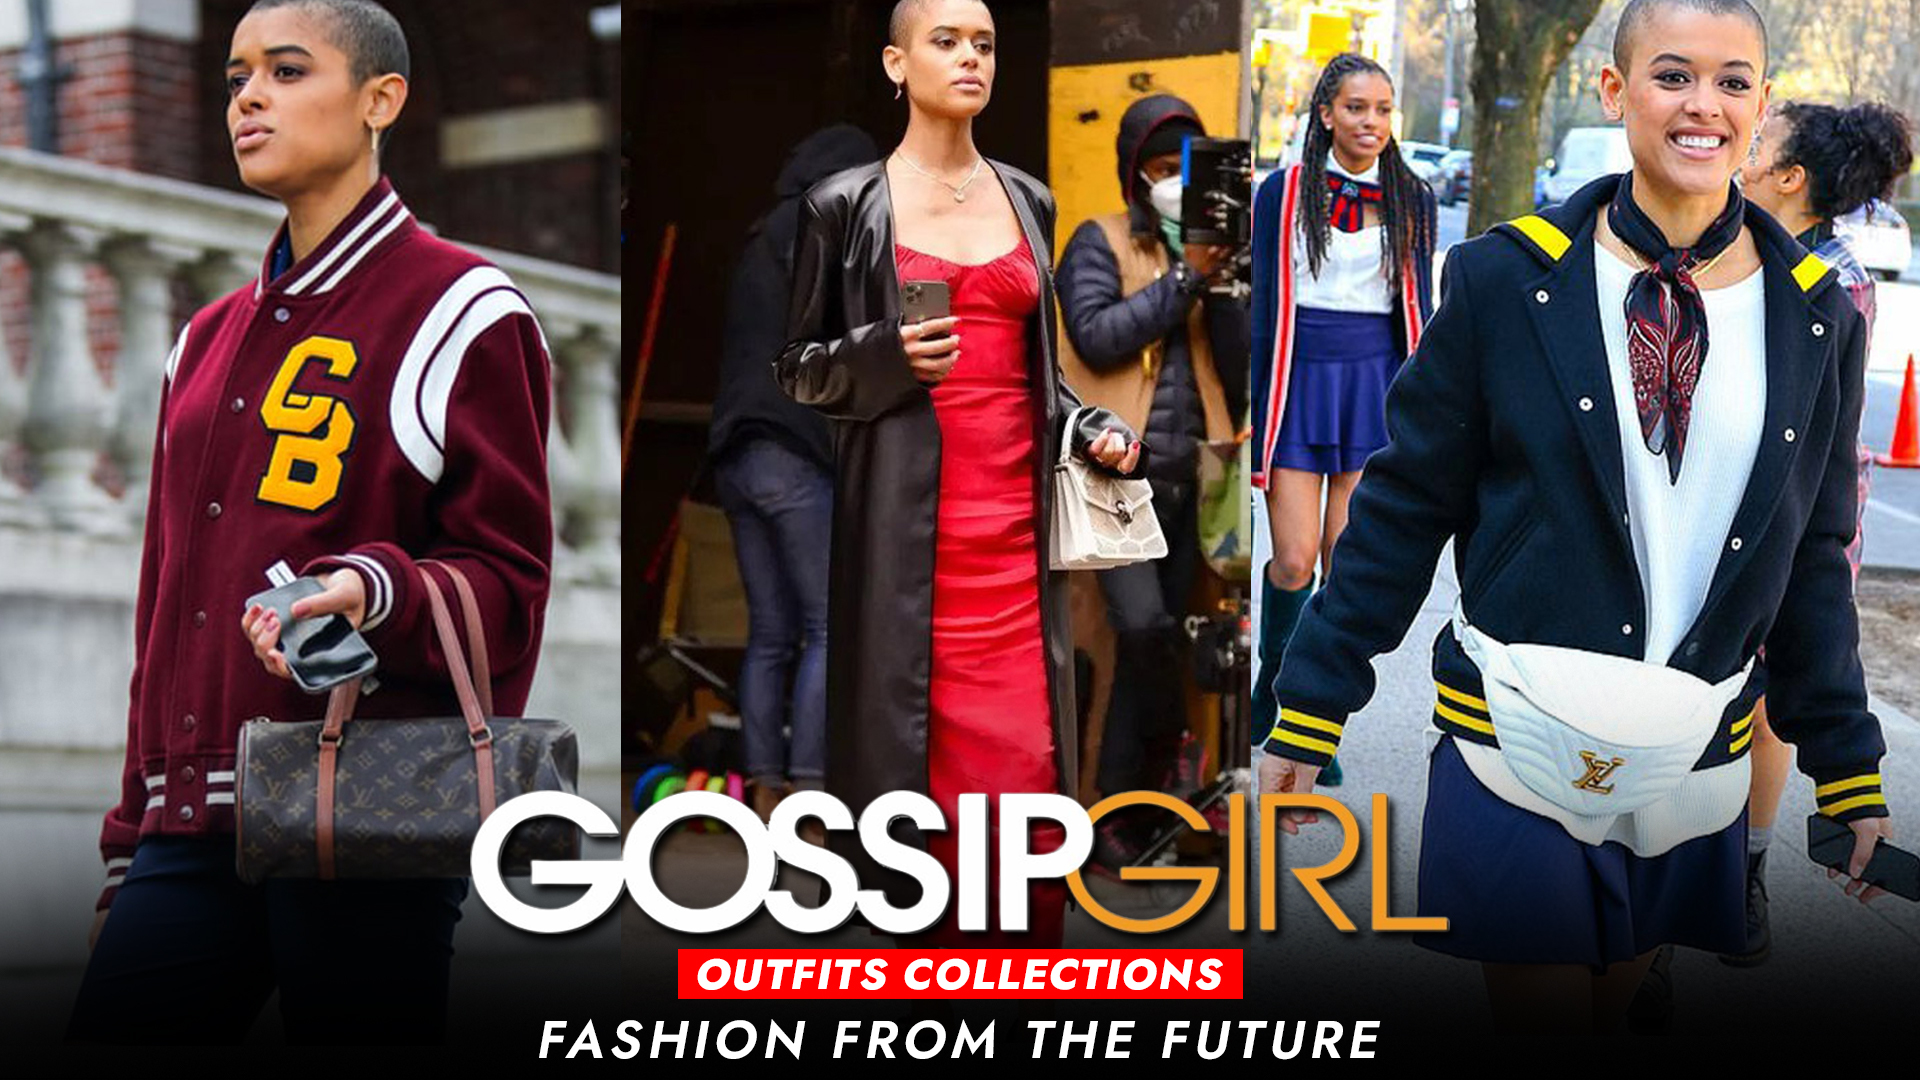 Gossip Girl Outfits Collections Is Fashion From the Future